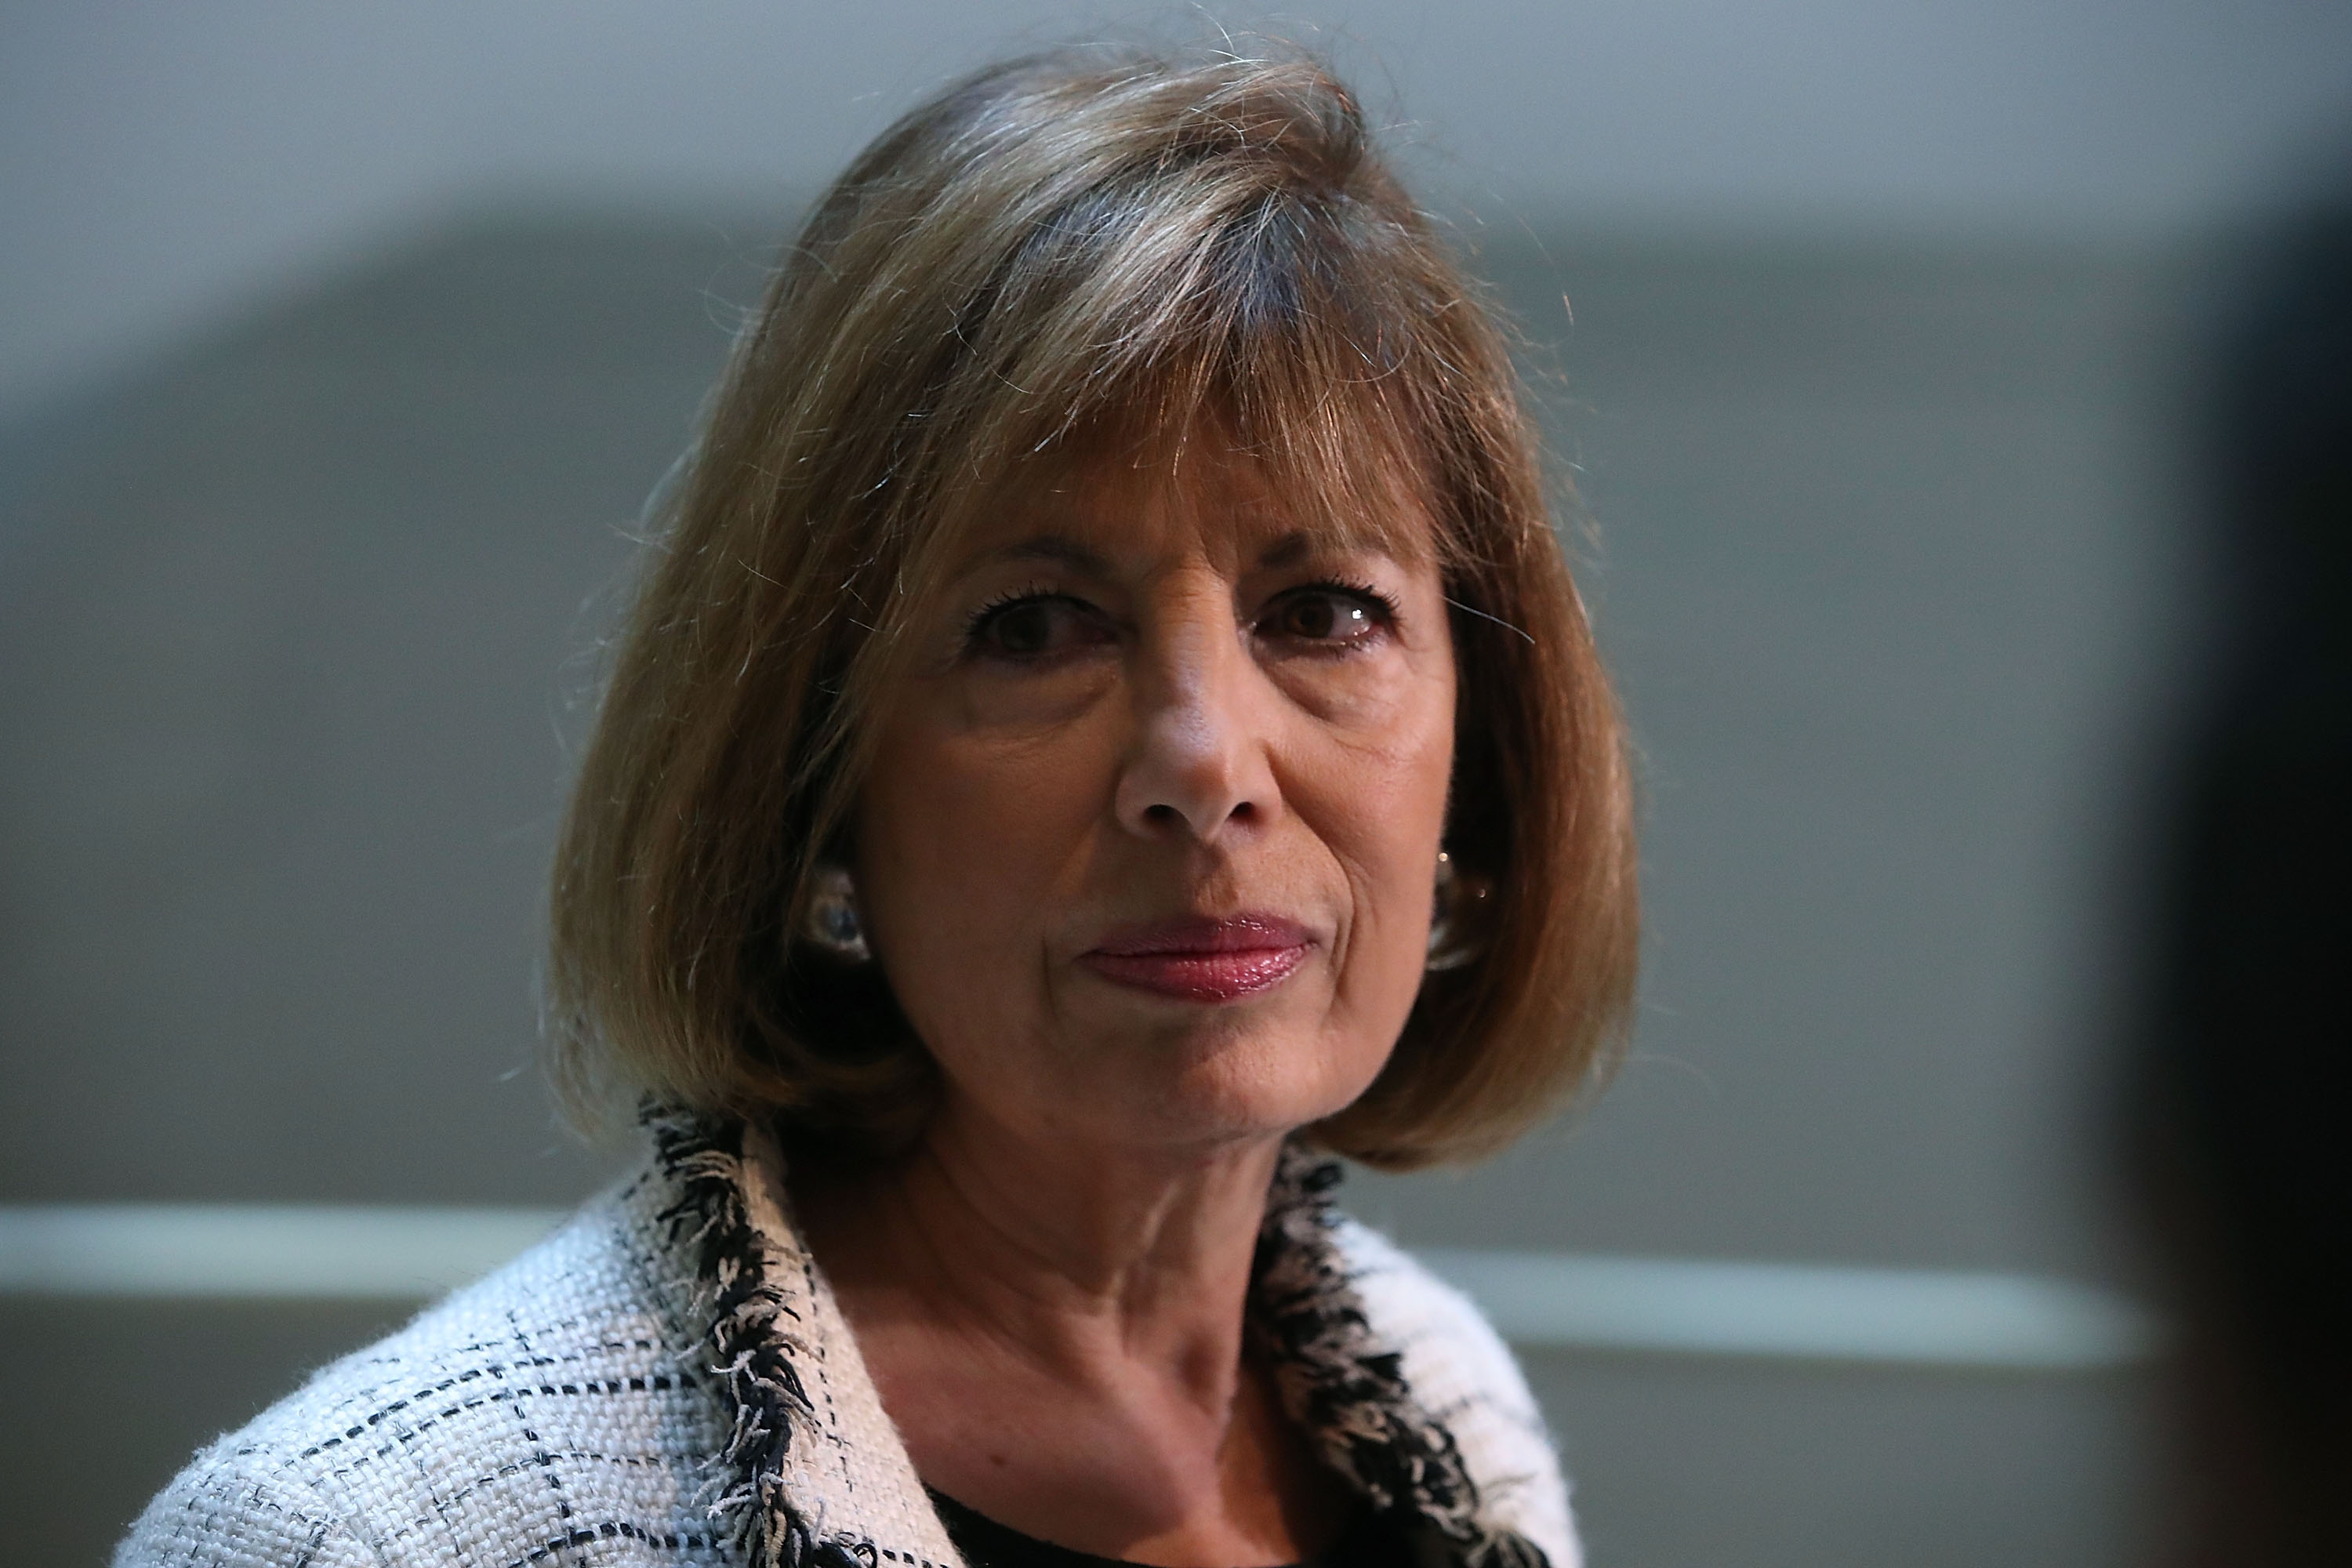 House Intelligence Committee member Rep. Jackie Speier (D-CA) speaks to reporters after leaving a closed meeting with fellow committee members, on Capitol Hill March 23, 2017 in Washington, DC. Committee Chairman, Devin Nunes (R-CA) has been under fire from committee members for informing President Donald Trump about the U.S. intelligence community's incidental collection of communications involving members of the president's transition group.  (Photo by Mark Wilson/Getty Images) (Mark Wilson&mdash;Getty Images)